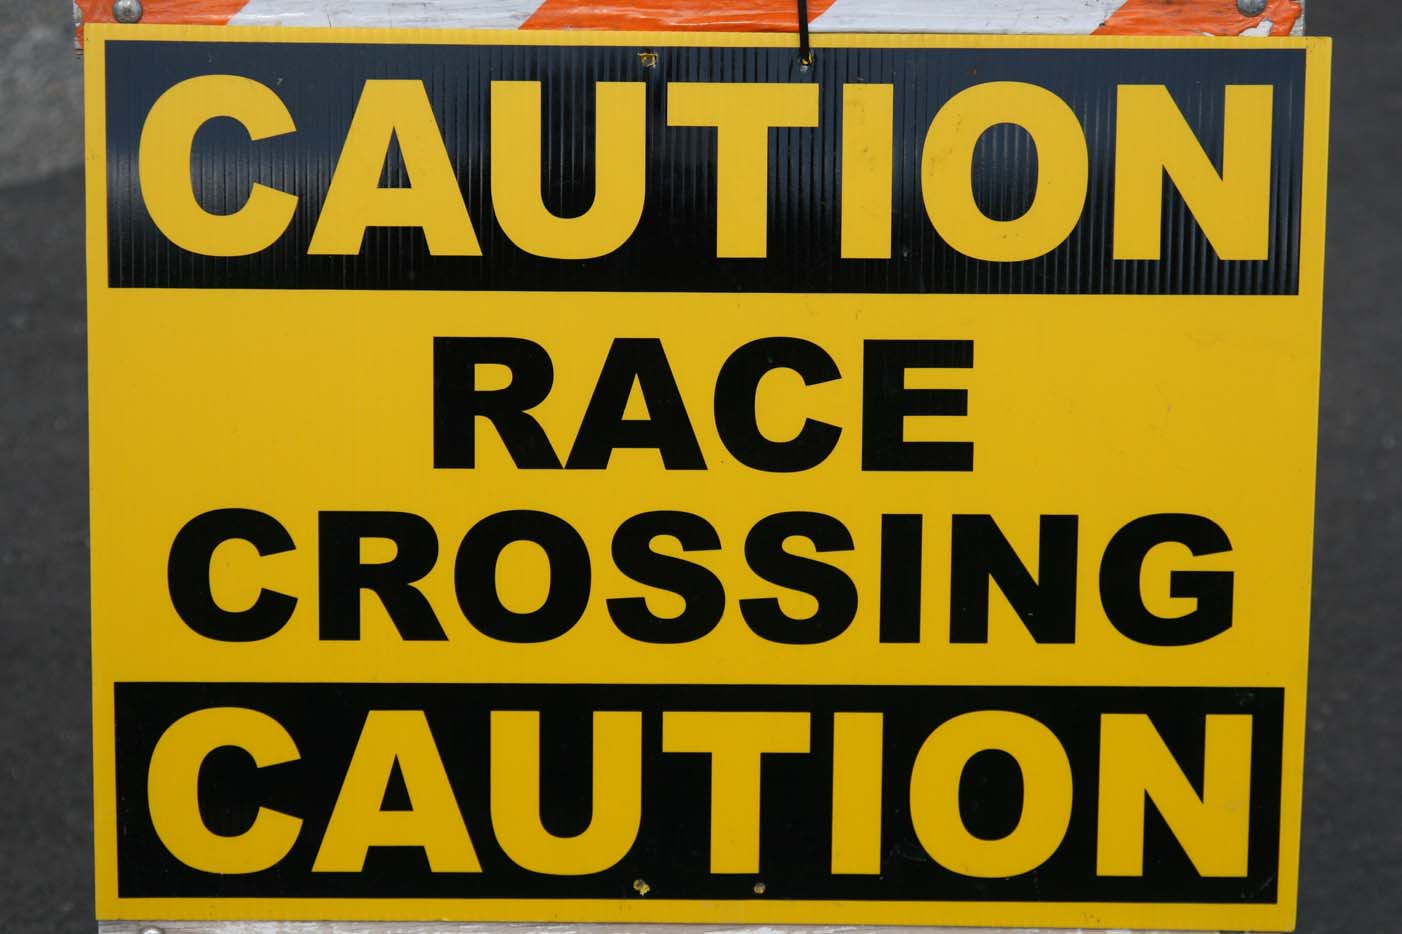 Perhaps it should also warn racers about the run-up?  by Janet Hill